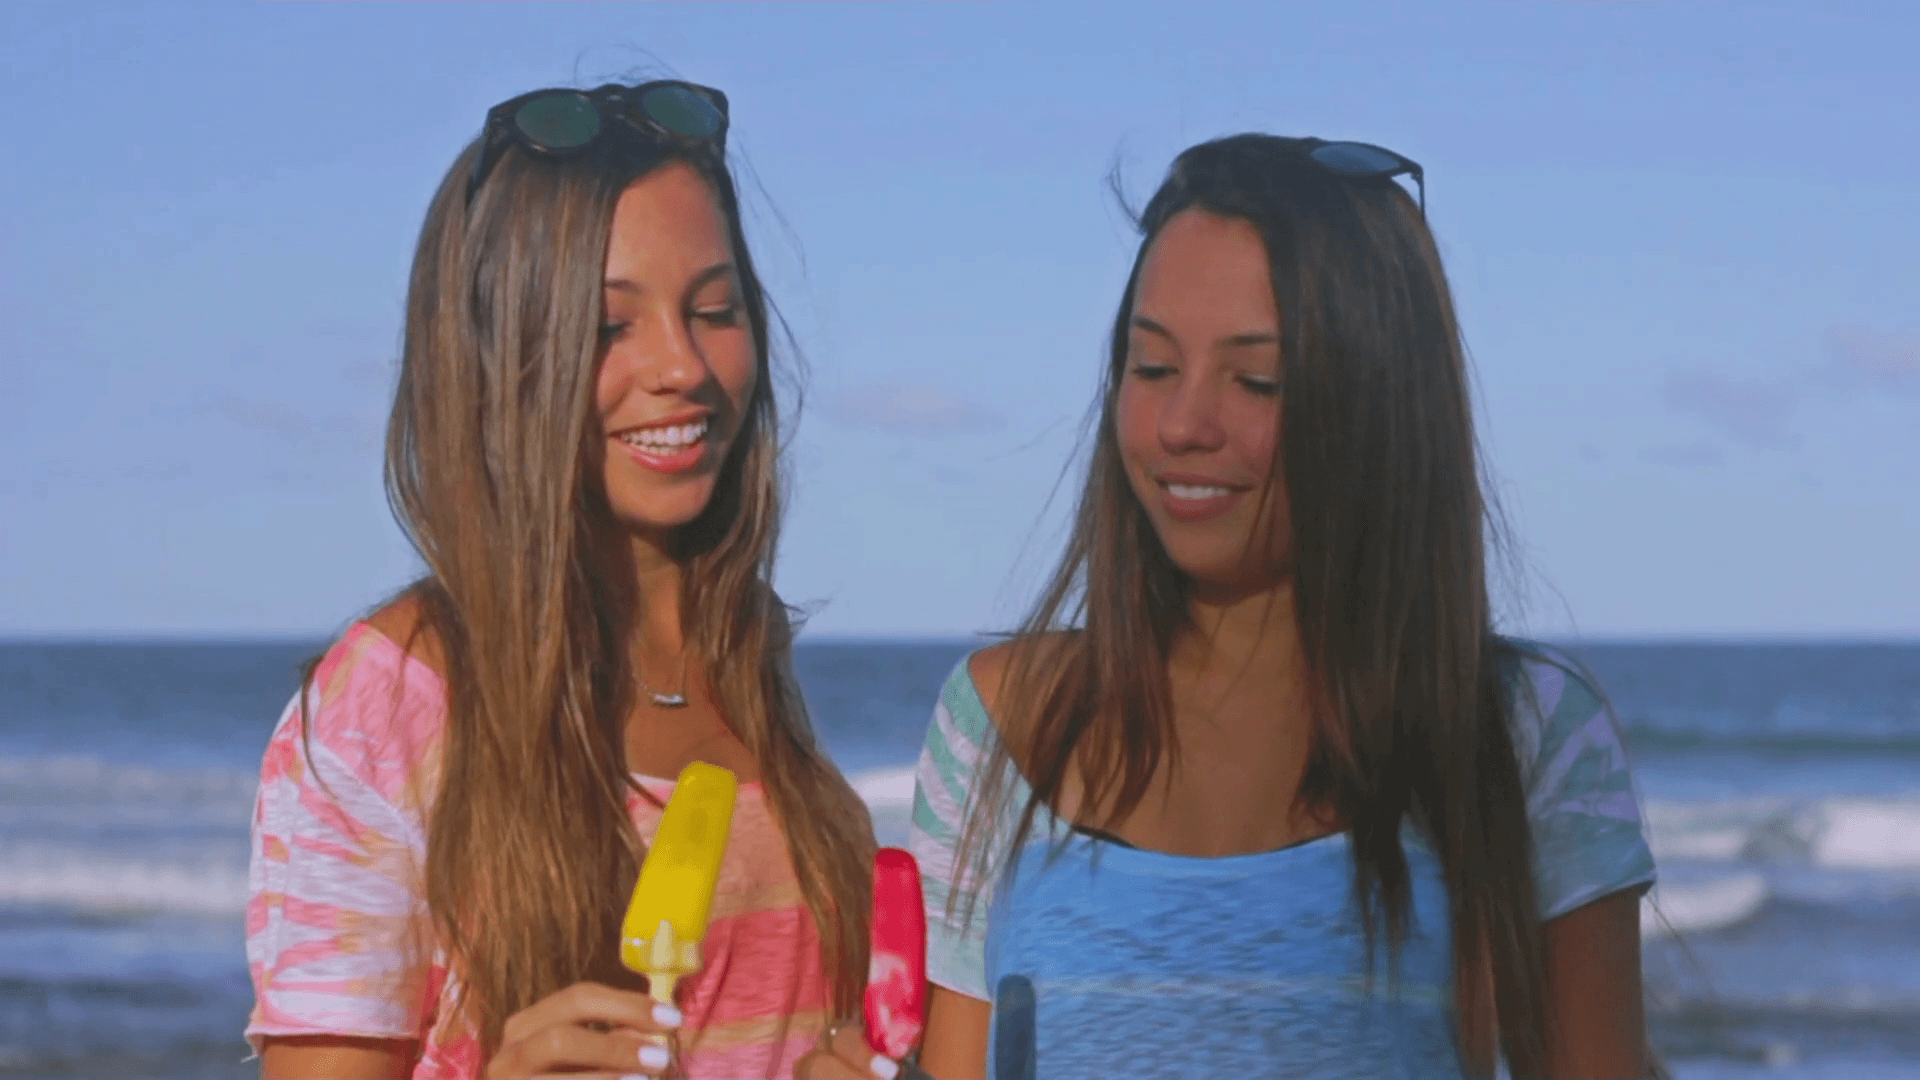 Twin Sisters Toasting Melting Popsicles In A Hot Summer Day Beach in Slow Motion Stock Video Footage